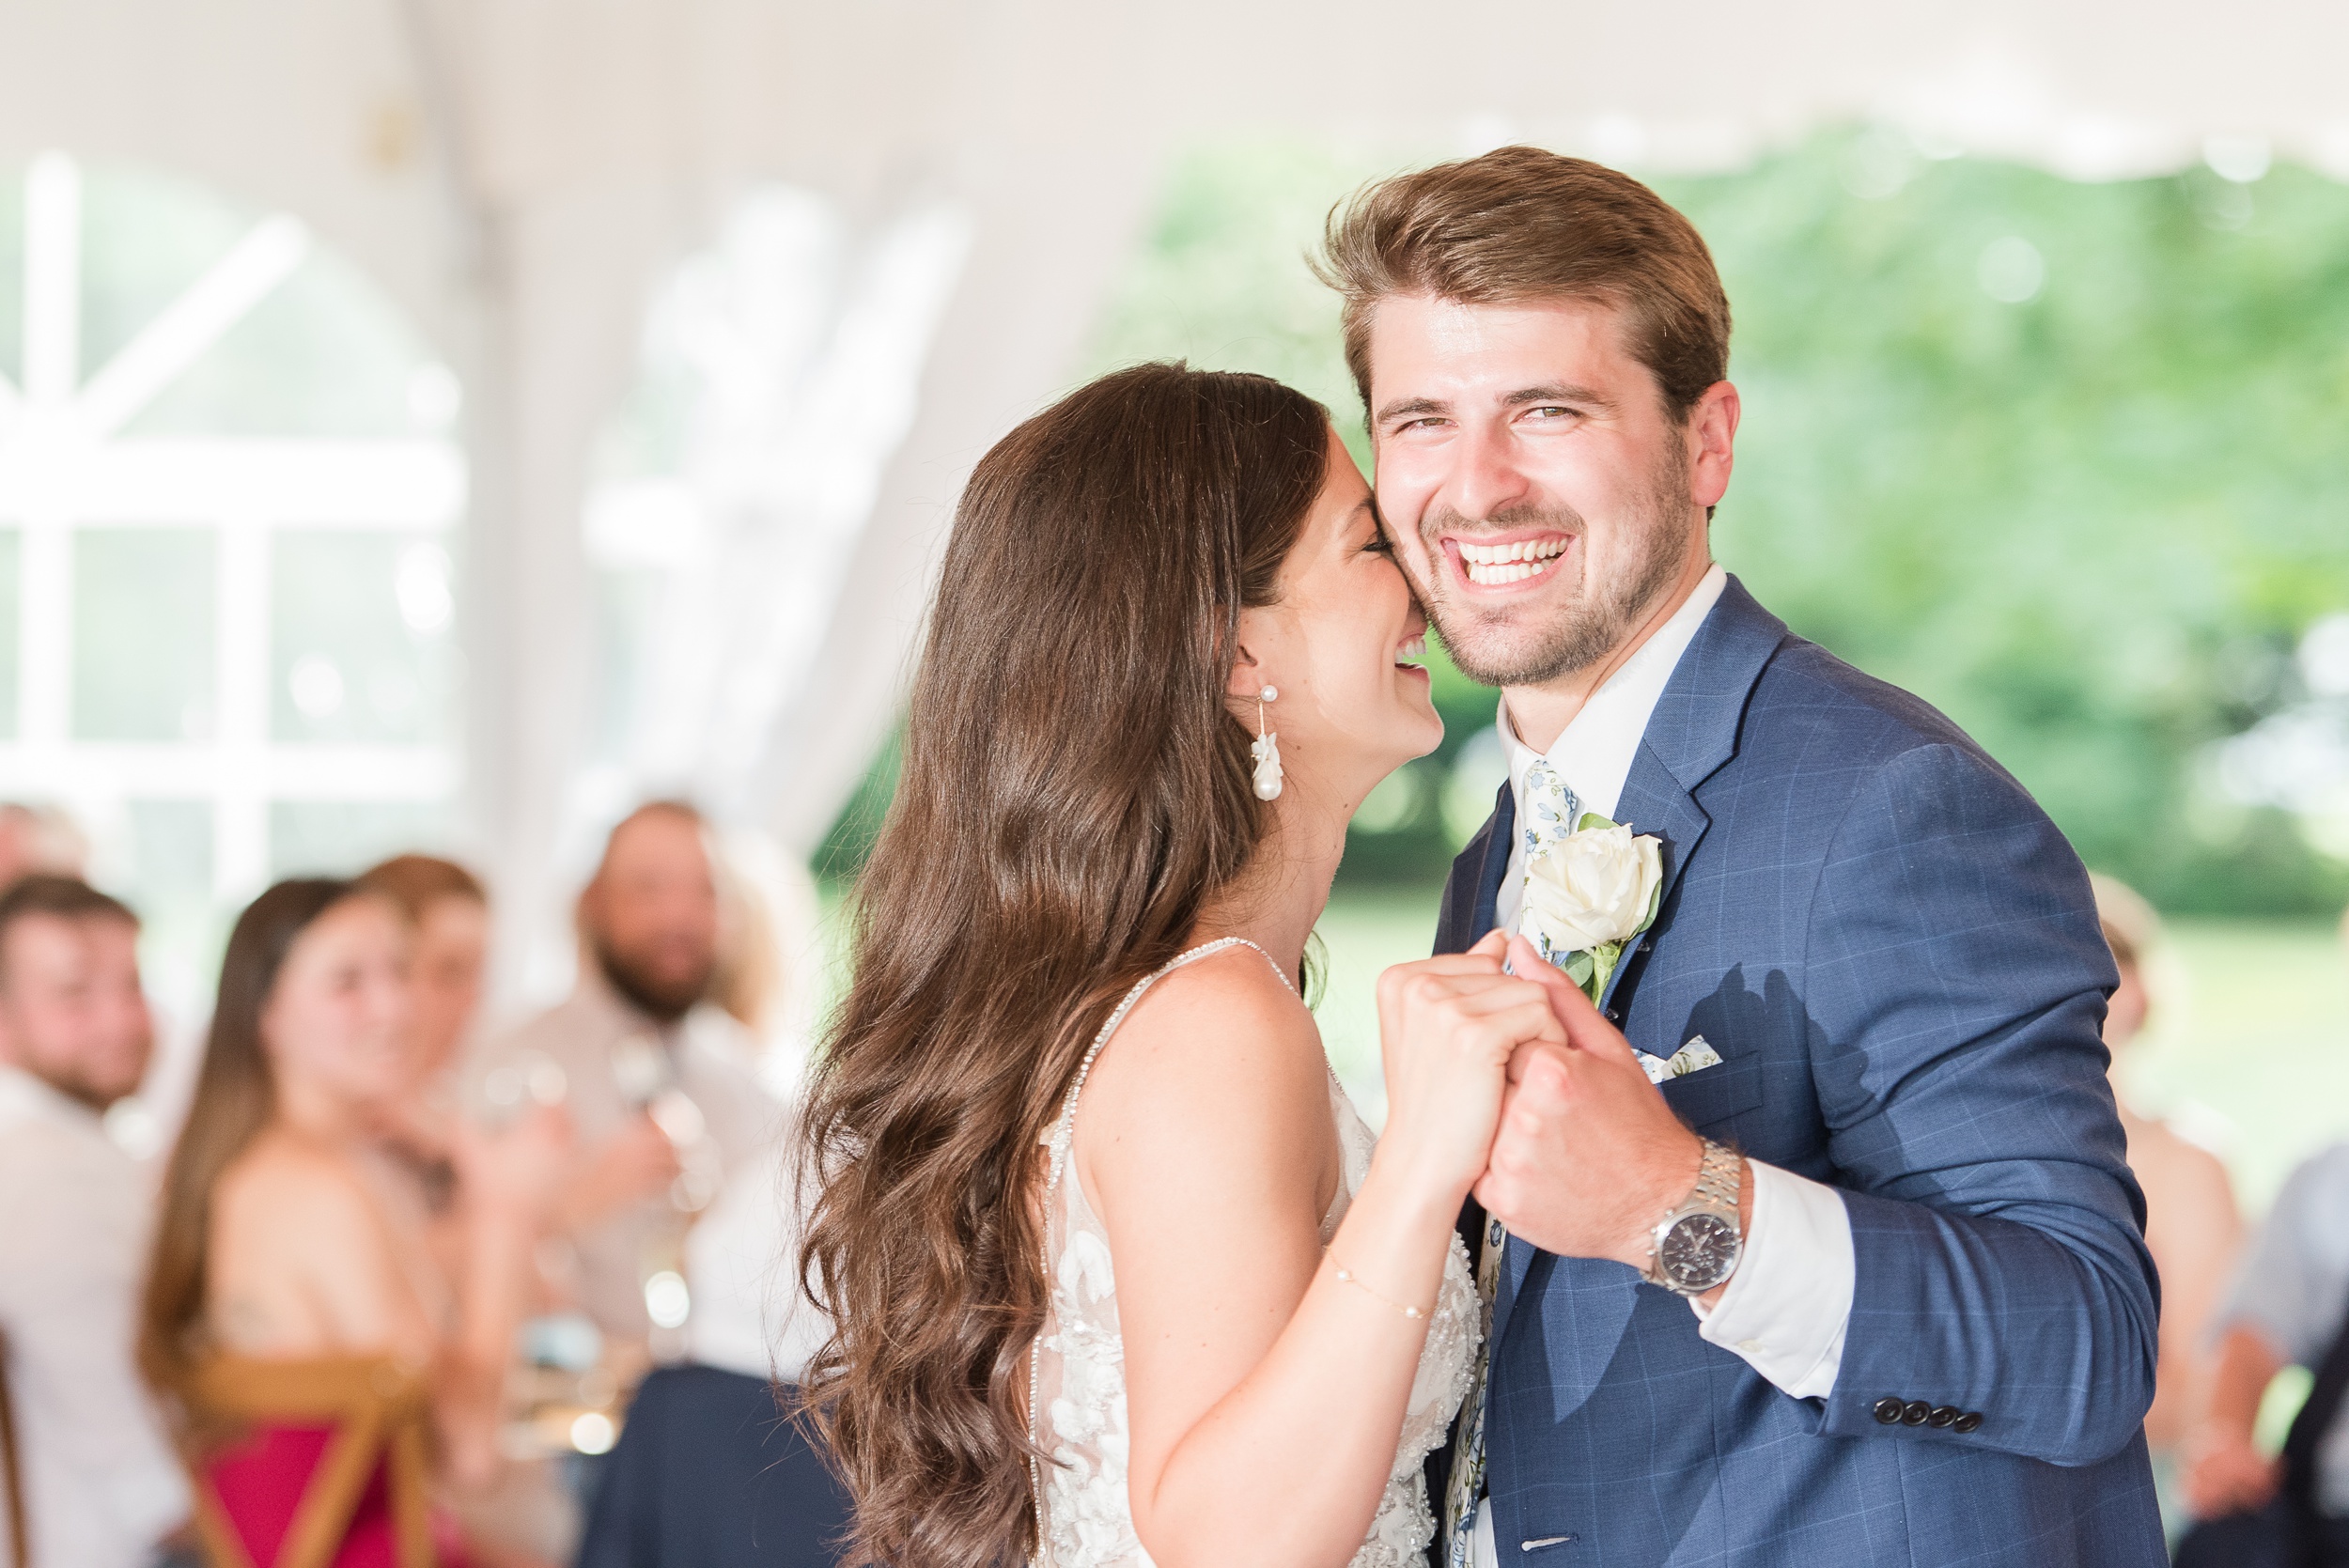 Newlyweds laugh while dancing for the first time during their wedding reception